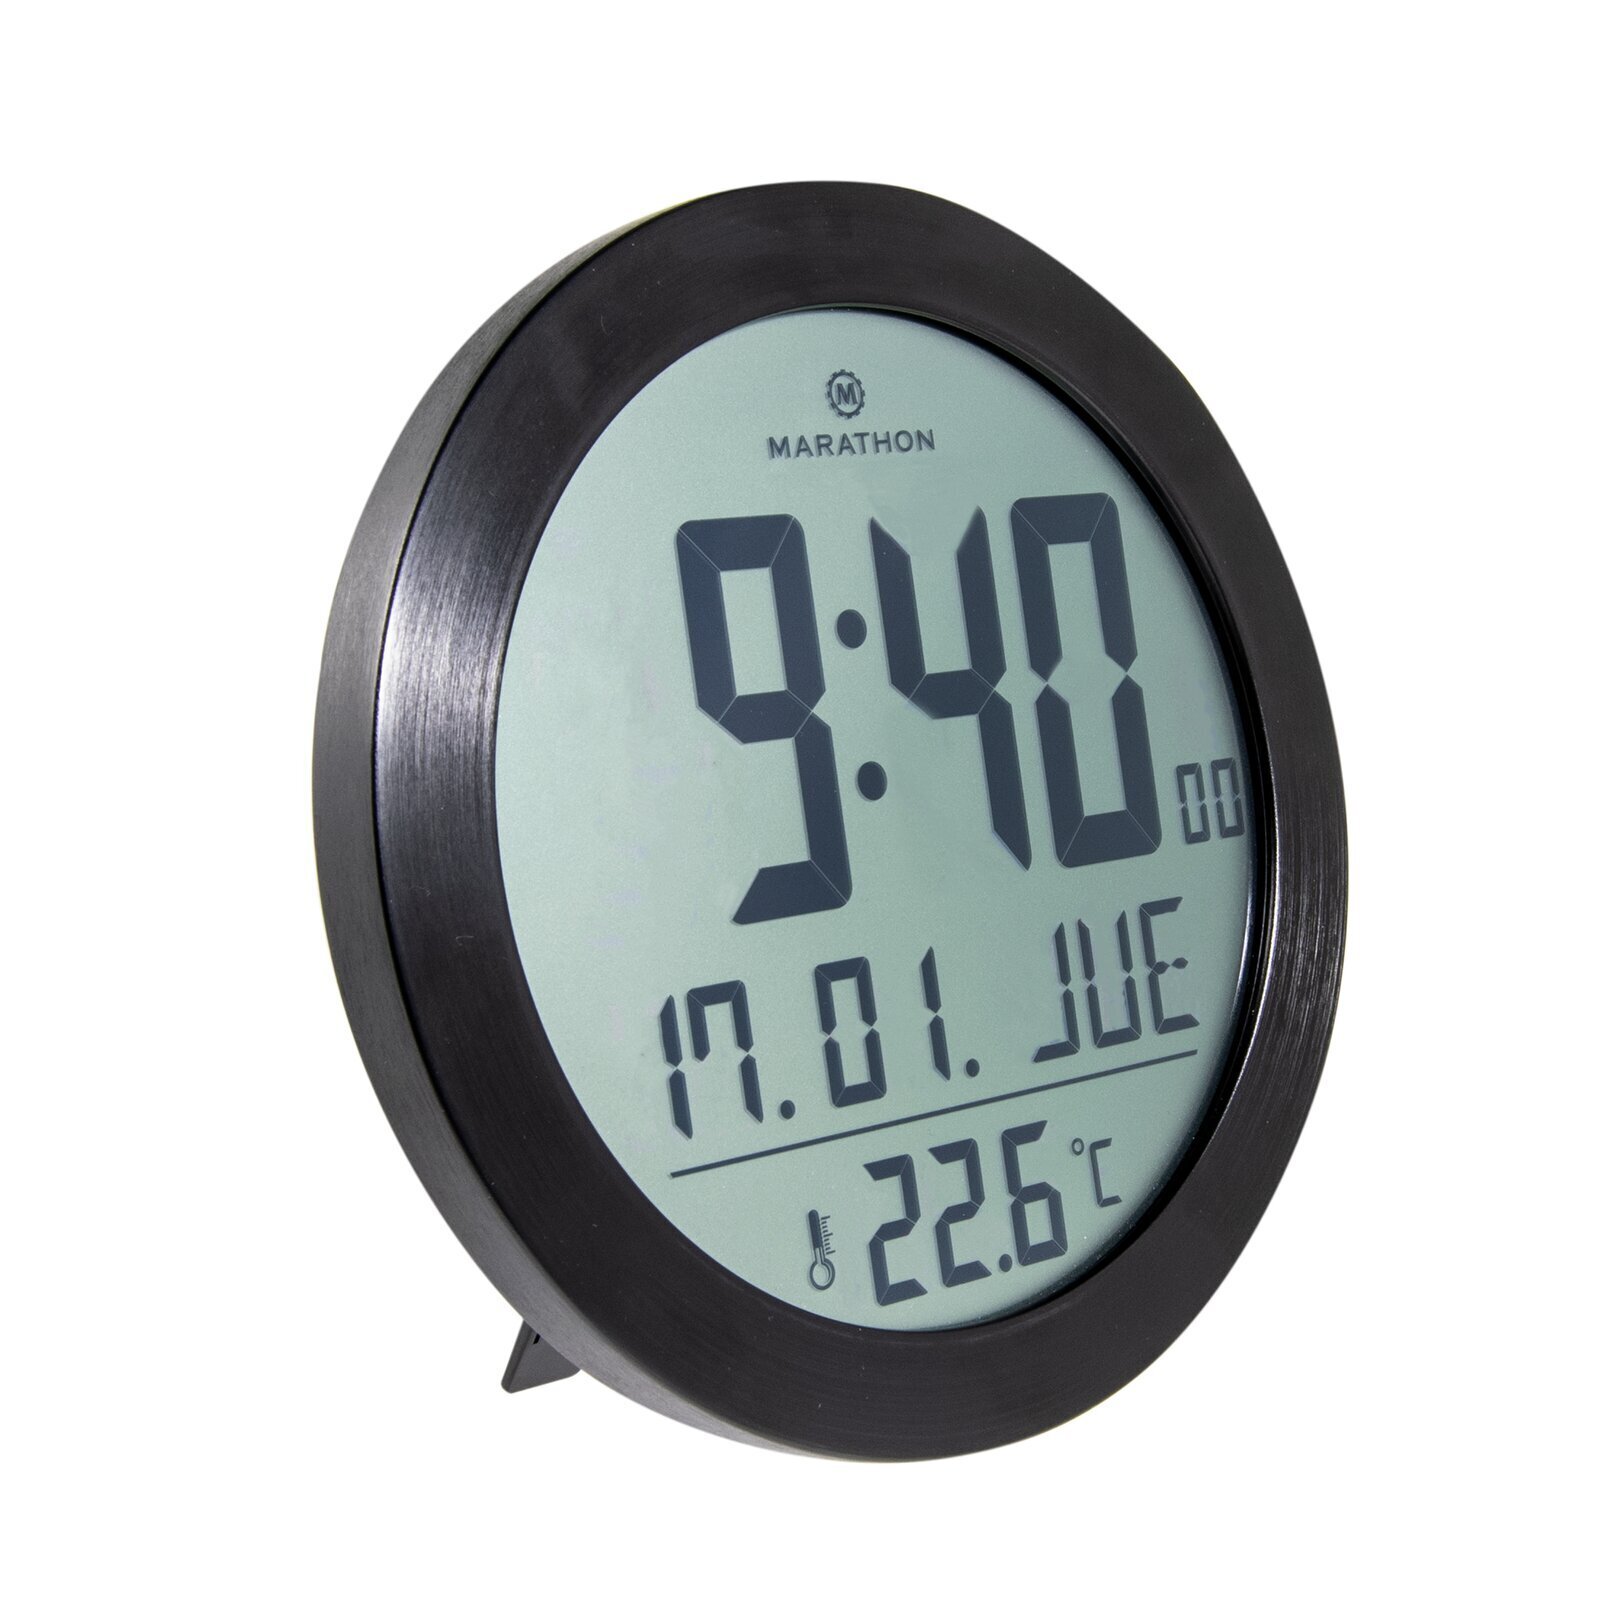 Large digital wall clock with day and date in an analog design